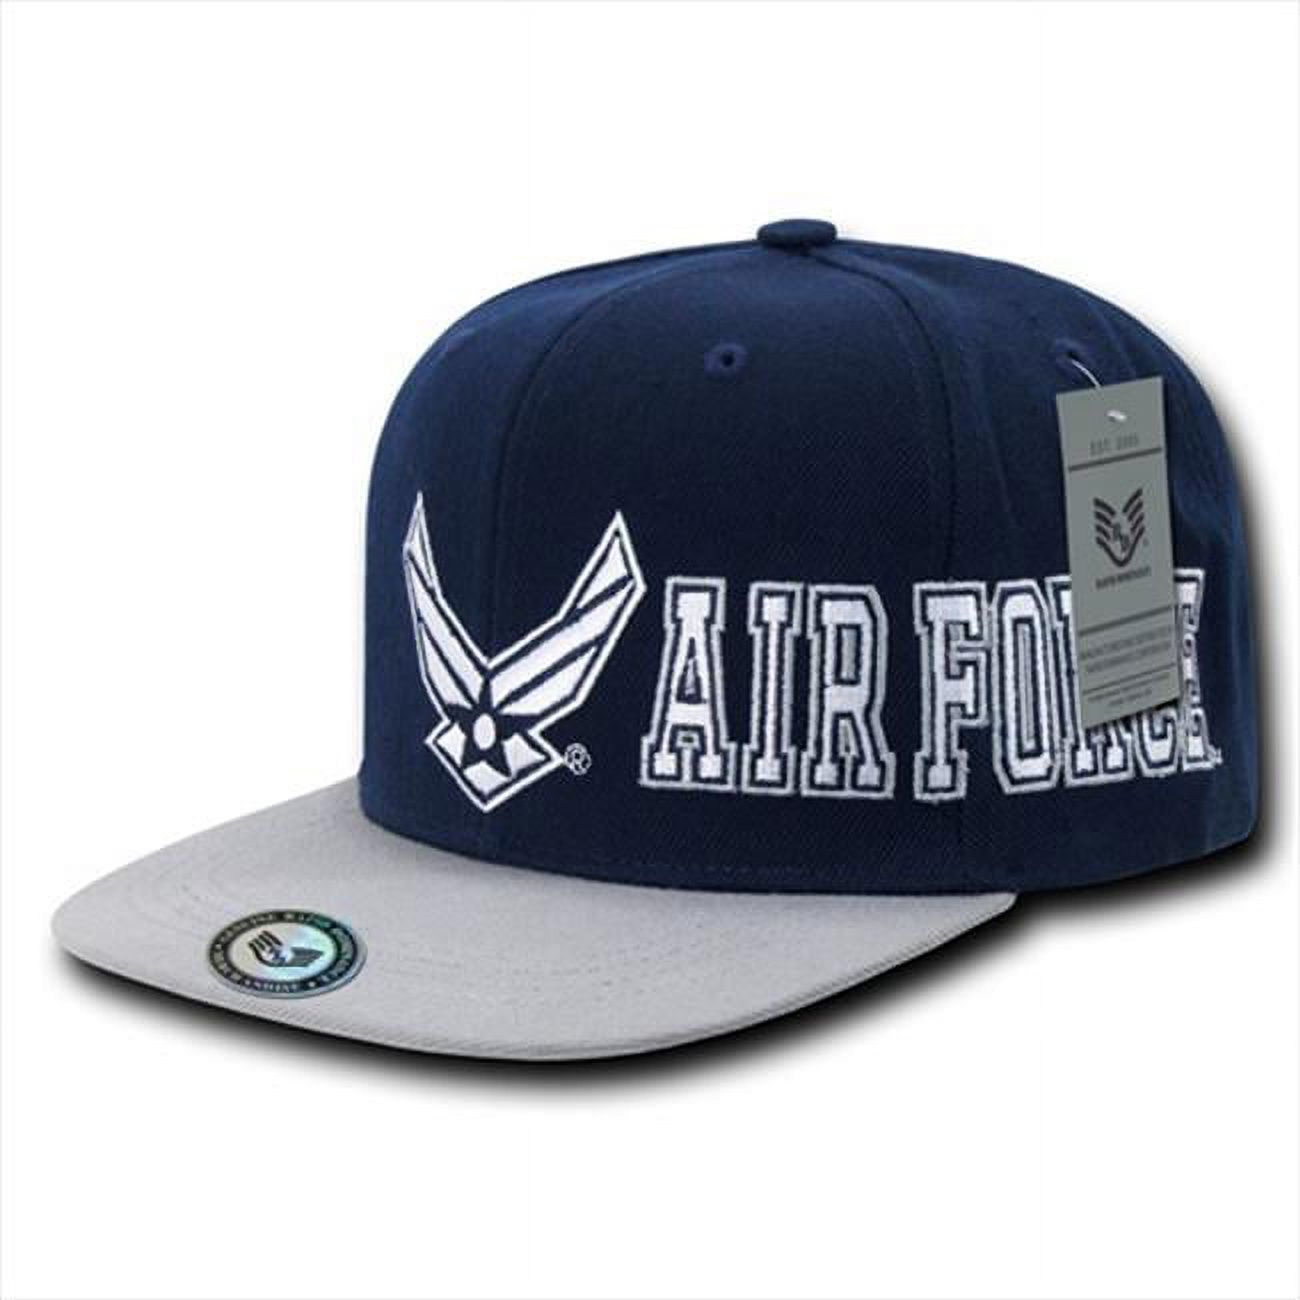 Rapid Dominance S005-AIRFORCE D-Day Military Caps- Air Force - image 1 of 2